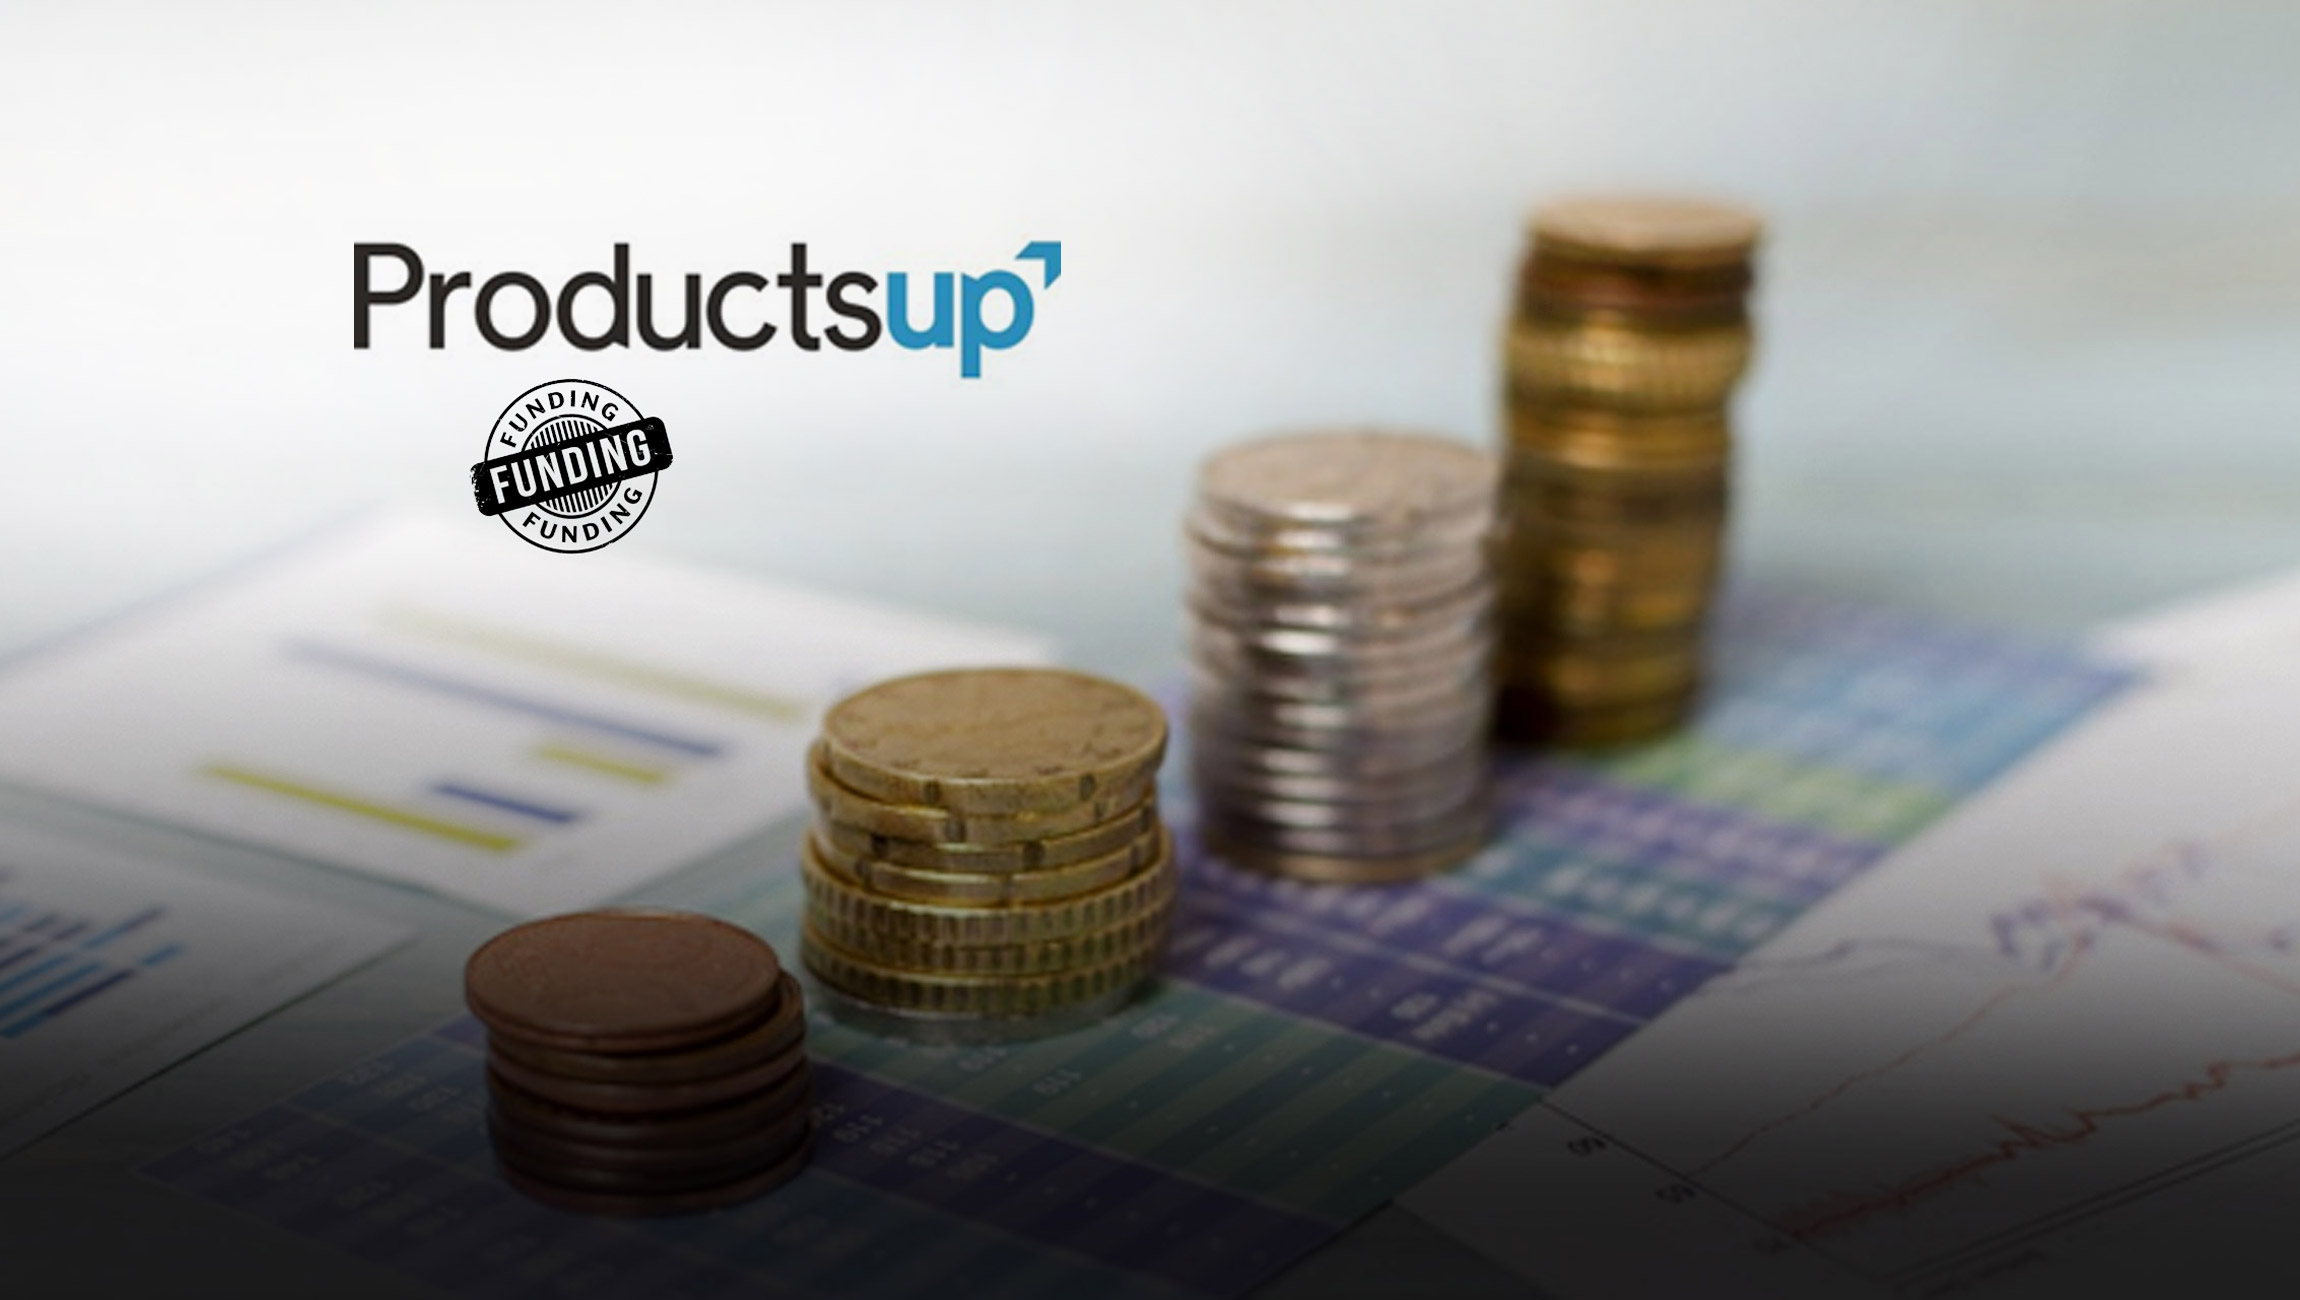 Productsup Announces Closing Of $20 Million In Funding Led By Nordwind Capital And Deutsche Handelsbank